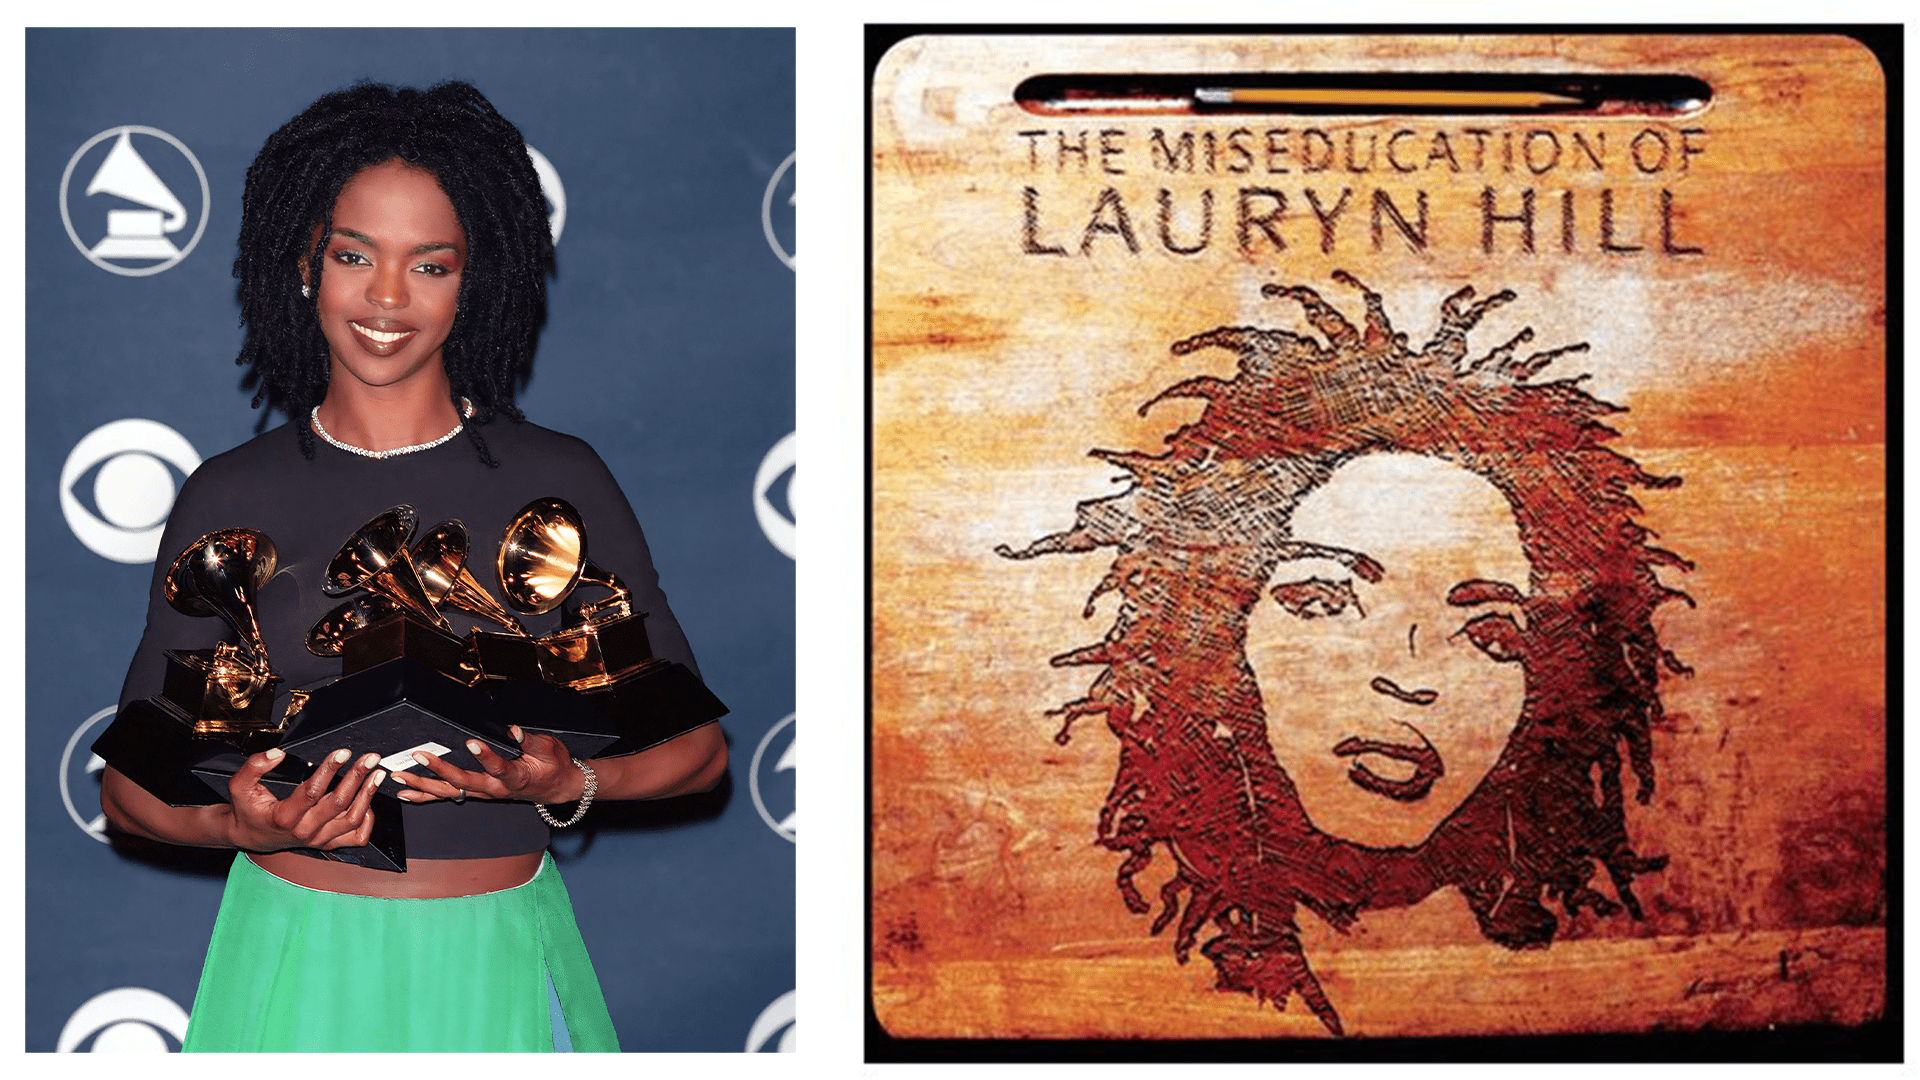 Ahead of the Class: 25 Years of The Miseducation of Lauryn Hill